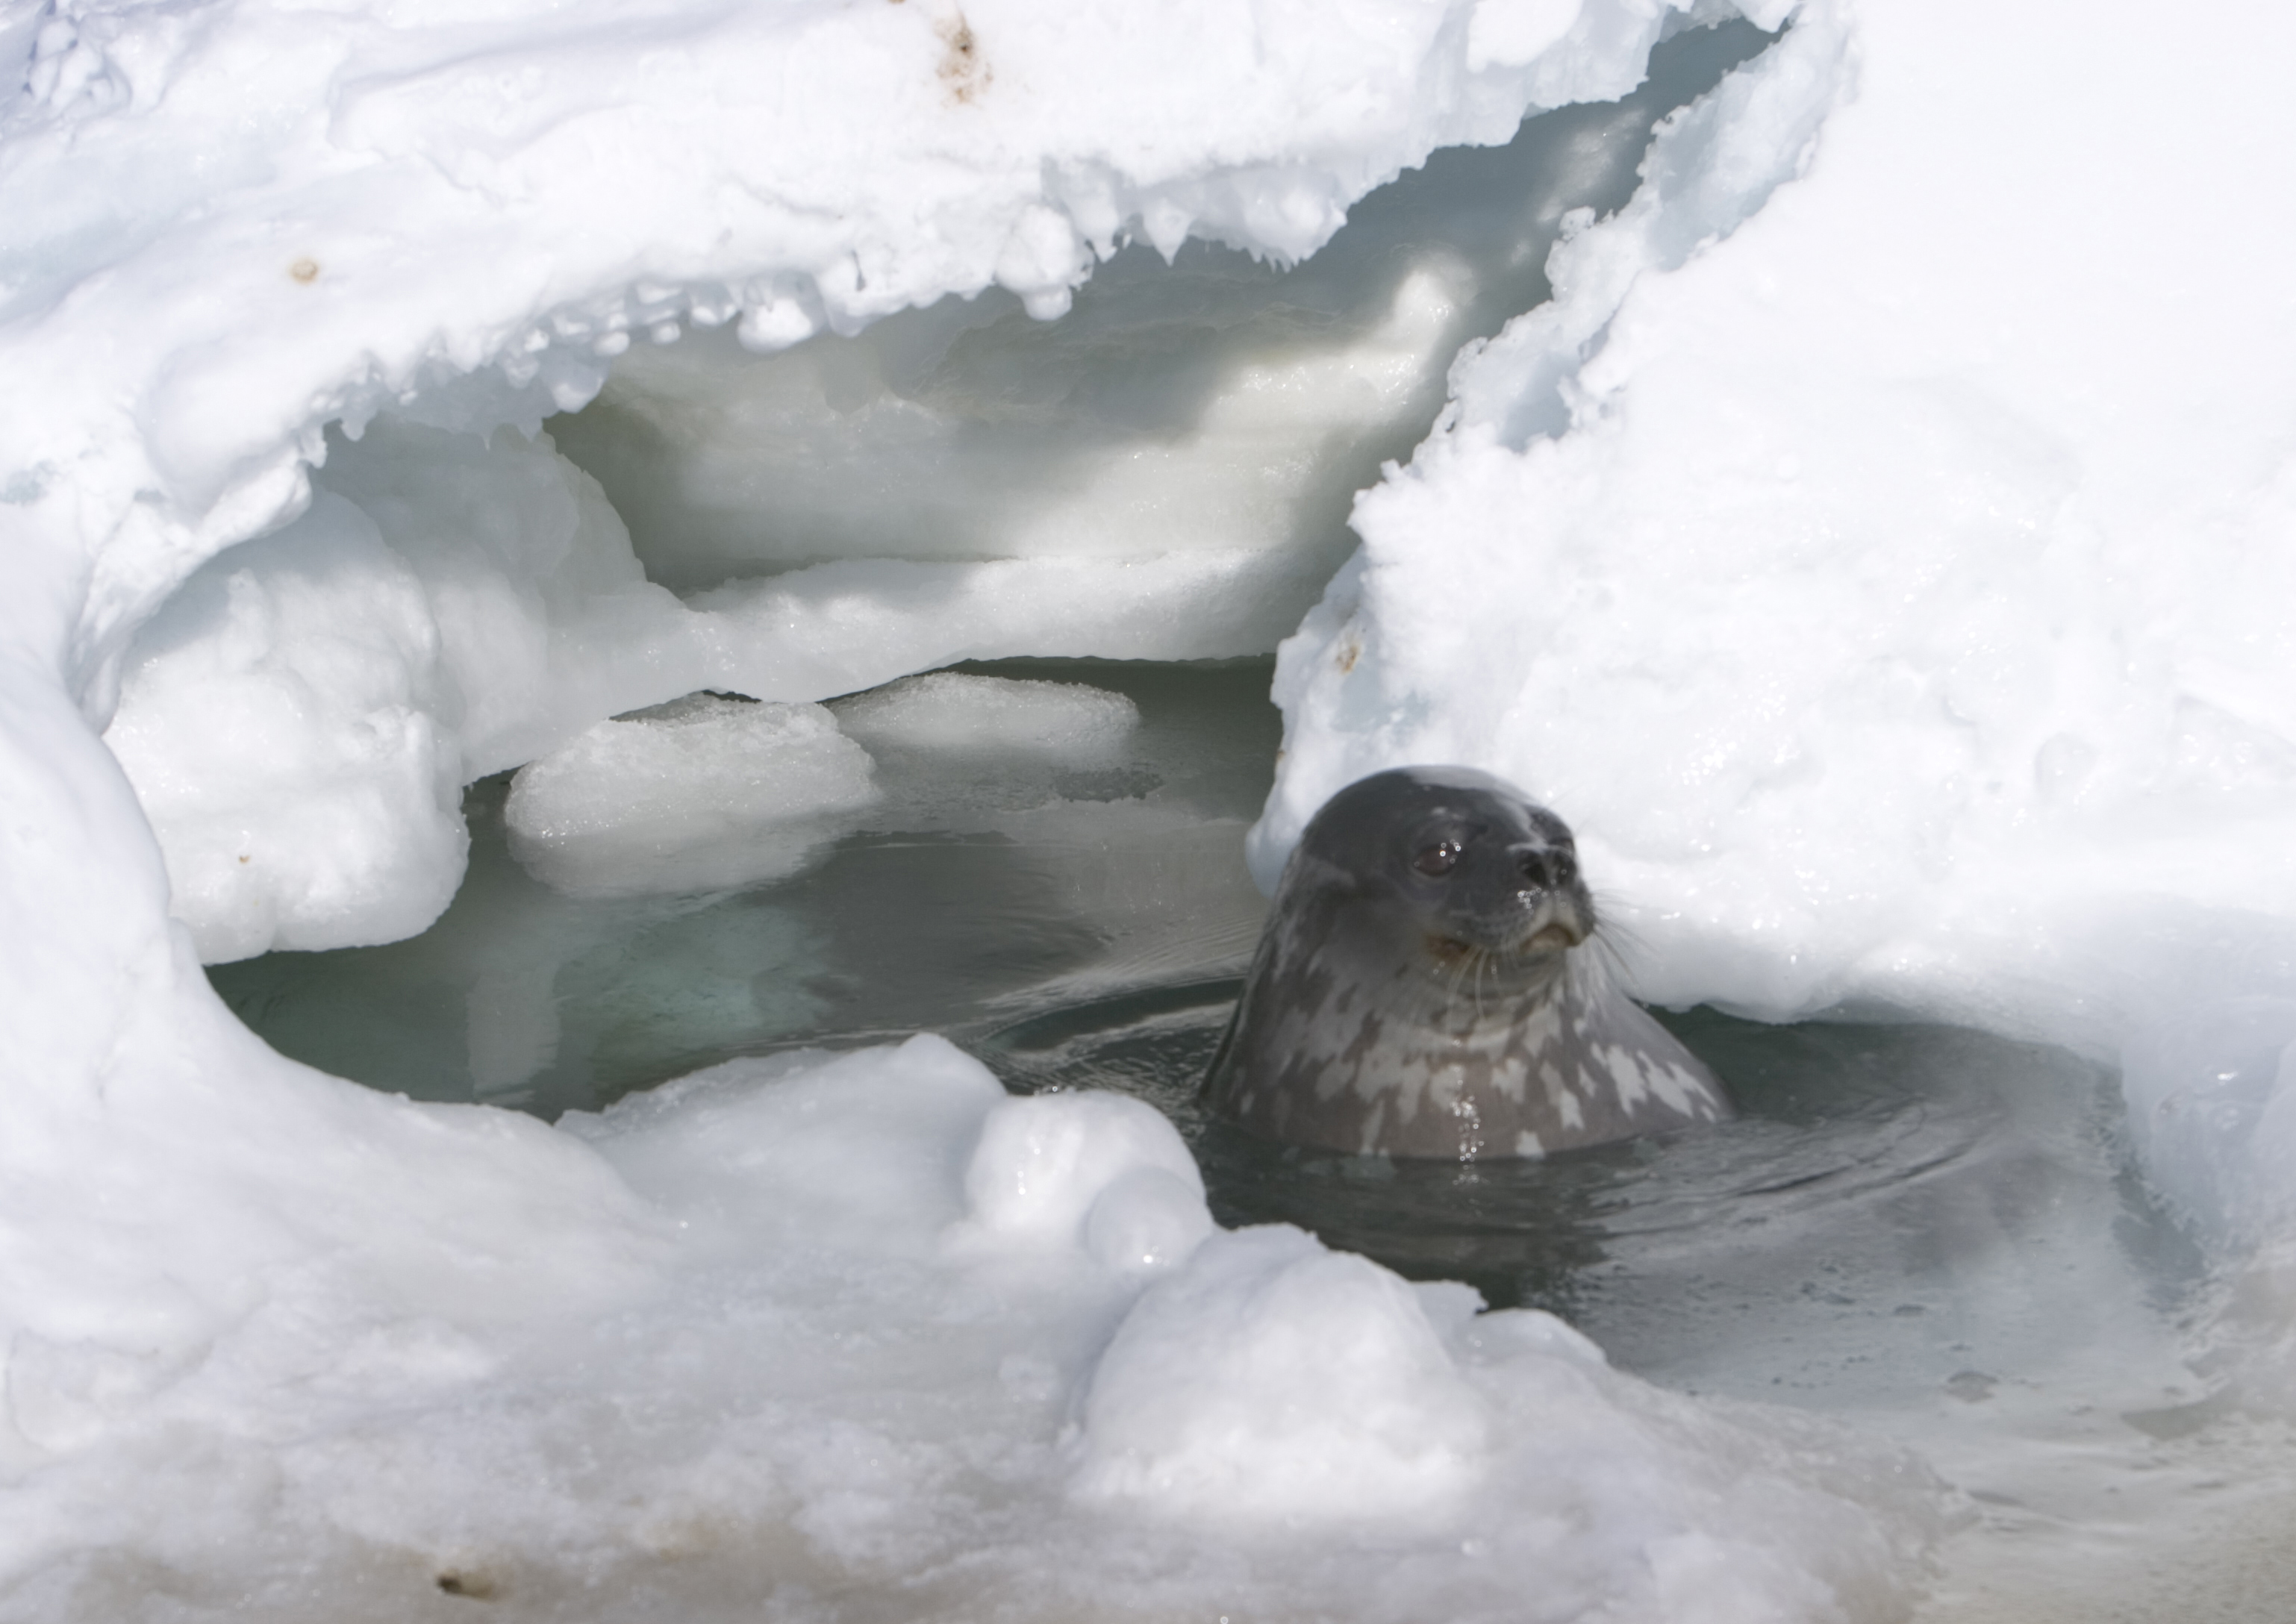 A seal in icy water.